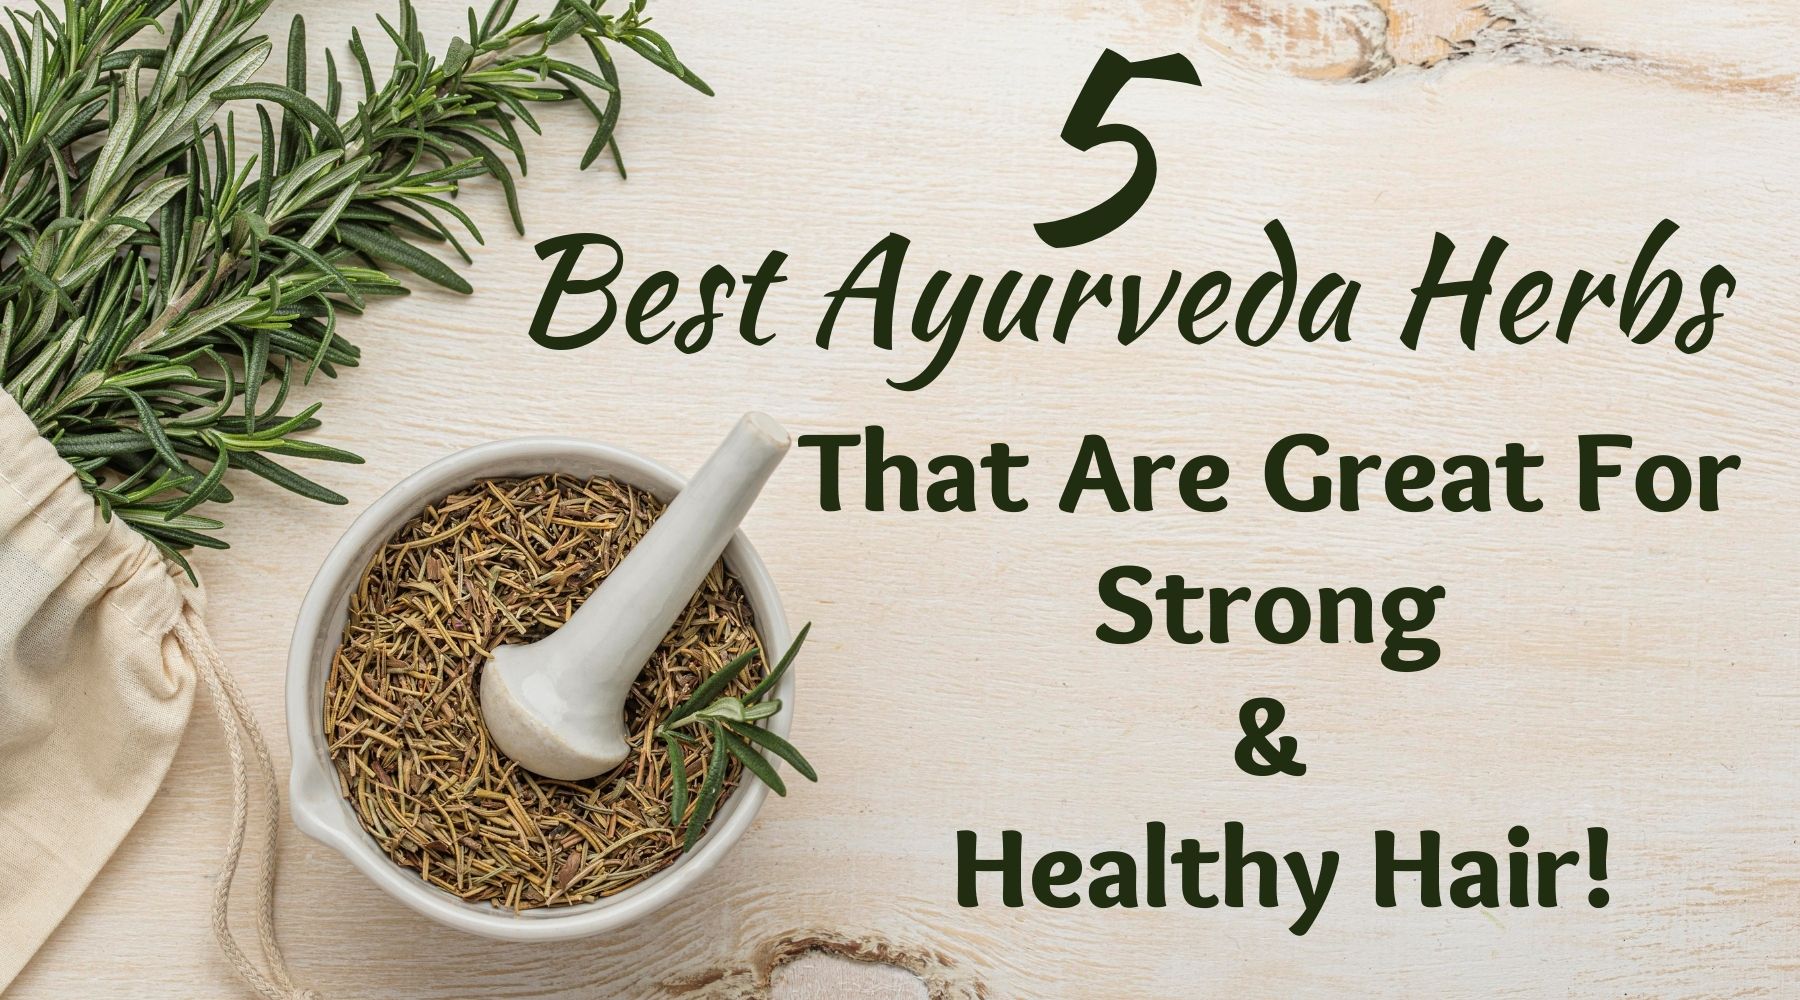 Five Best Ayurveda Herbs That Are Great For Strong & Healthy Hair!